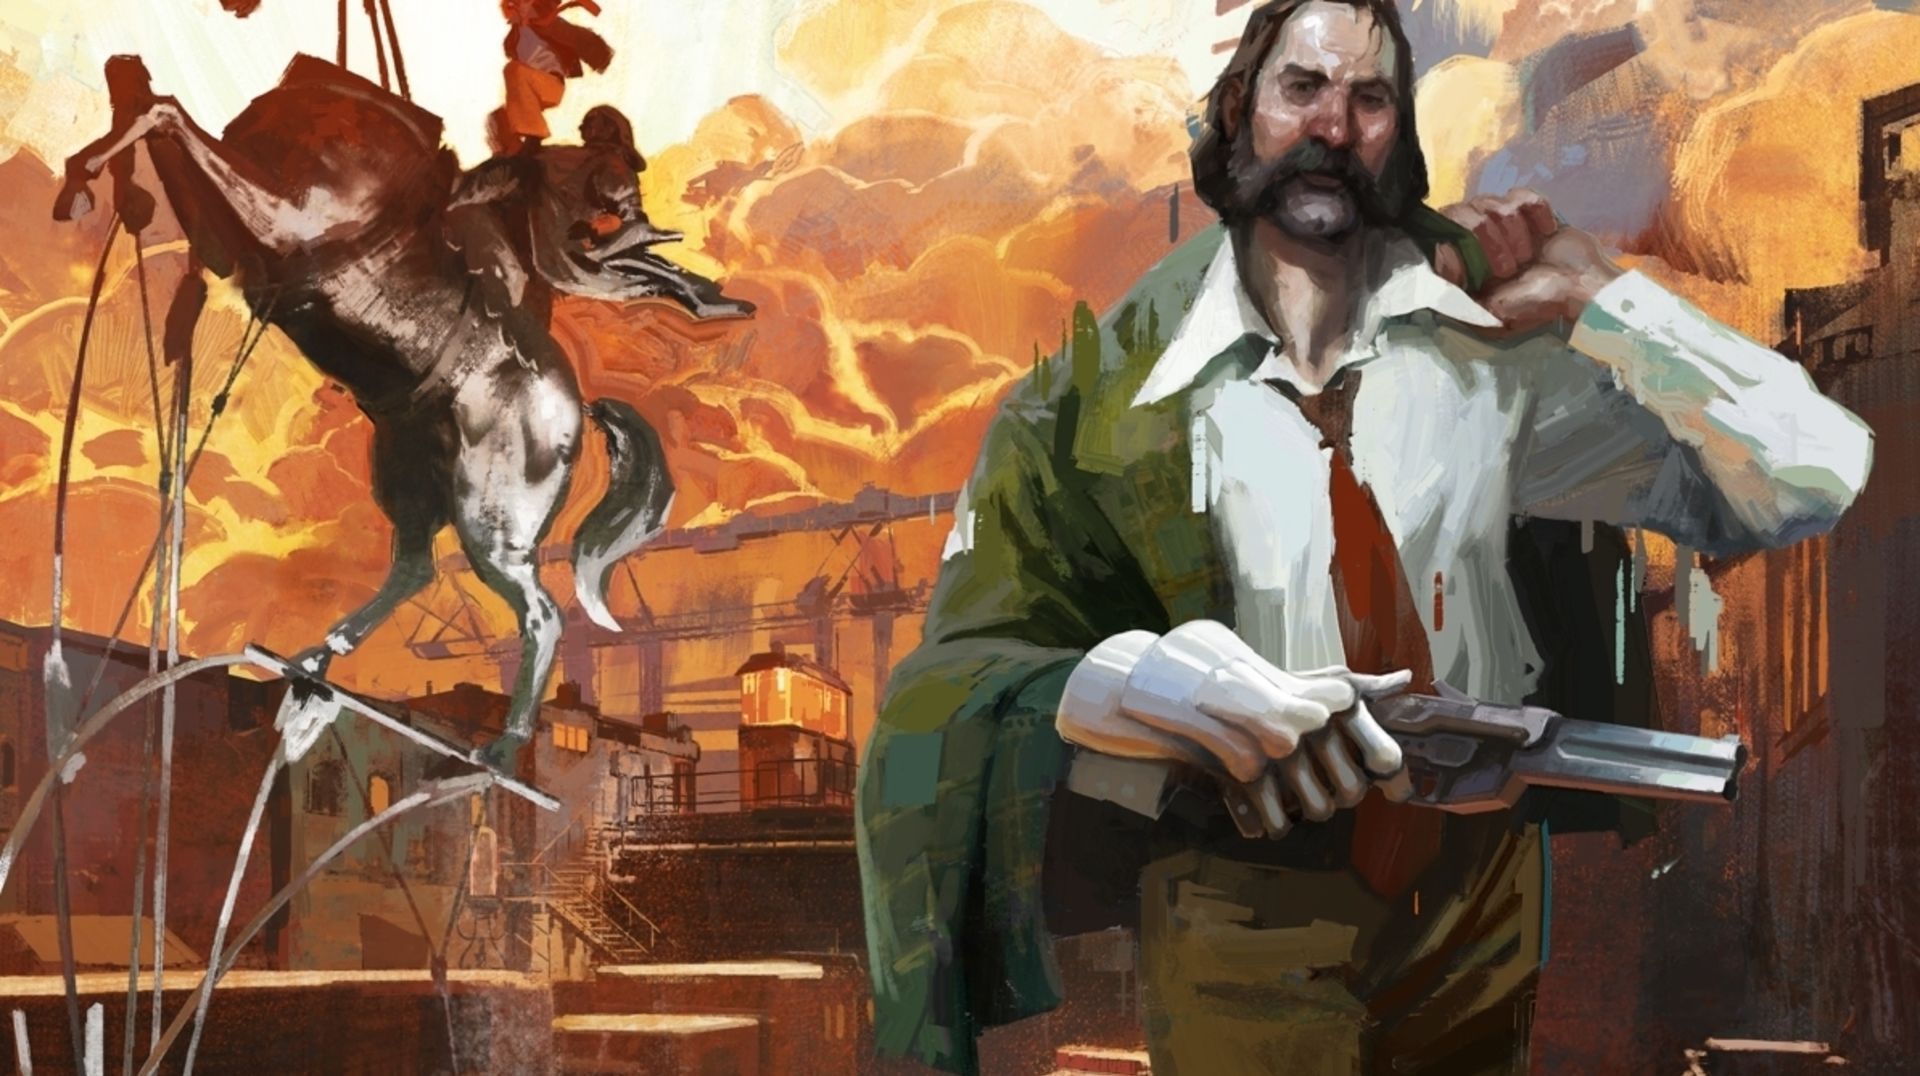 Disco Elysium Review Scale Whodunit With A Distinct Lack